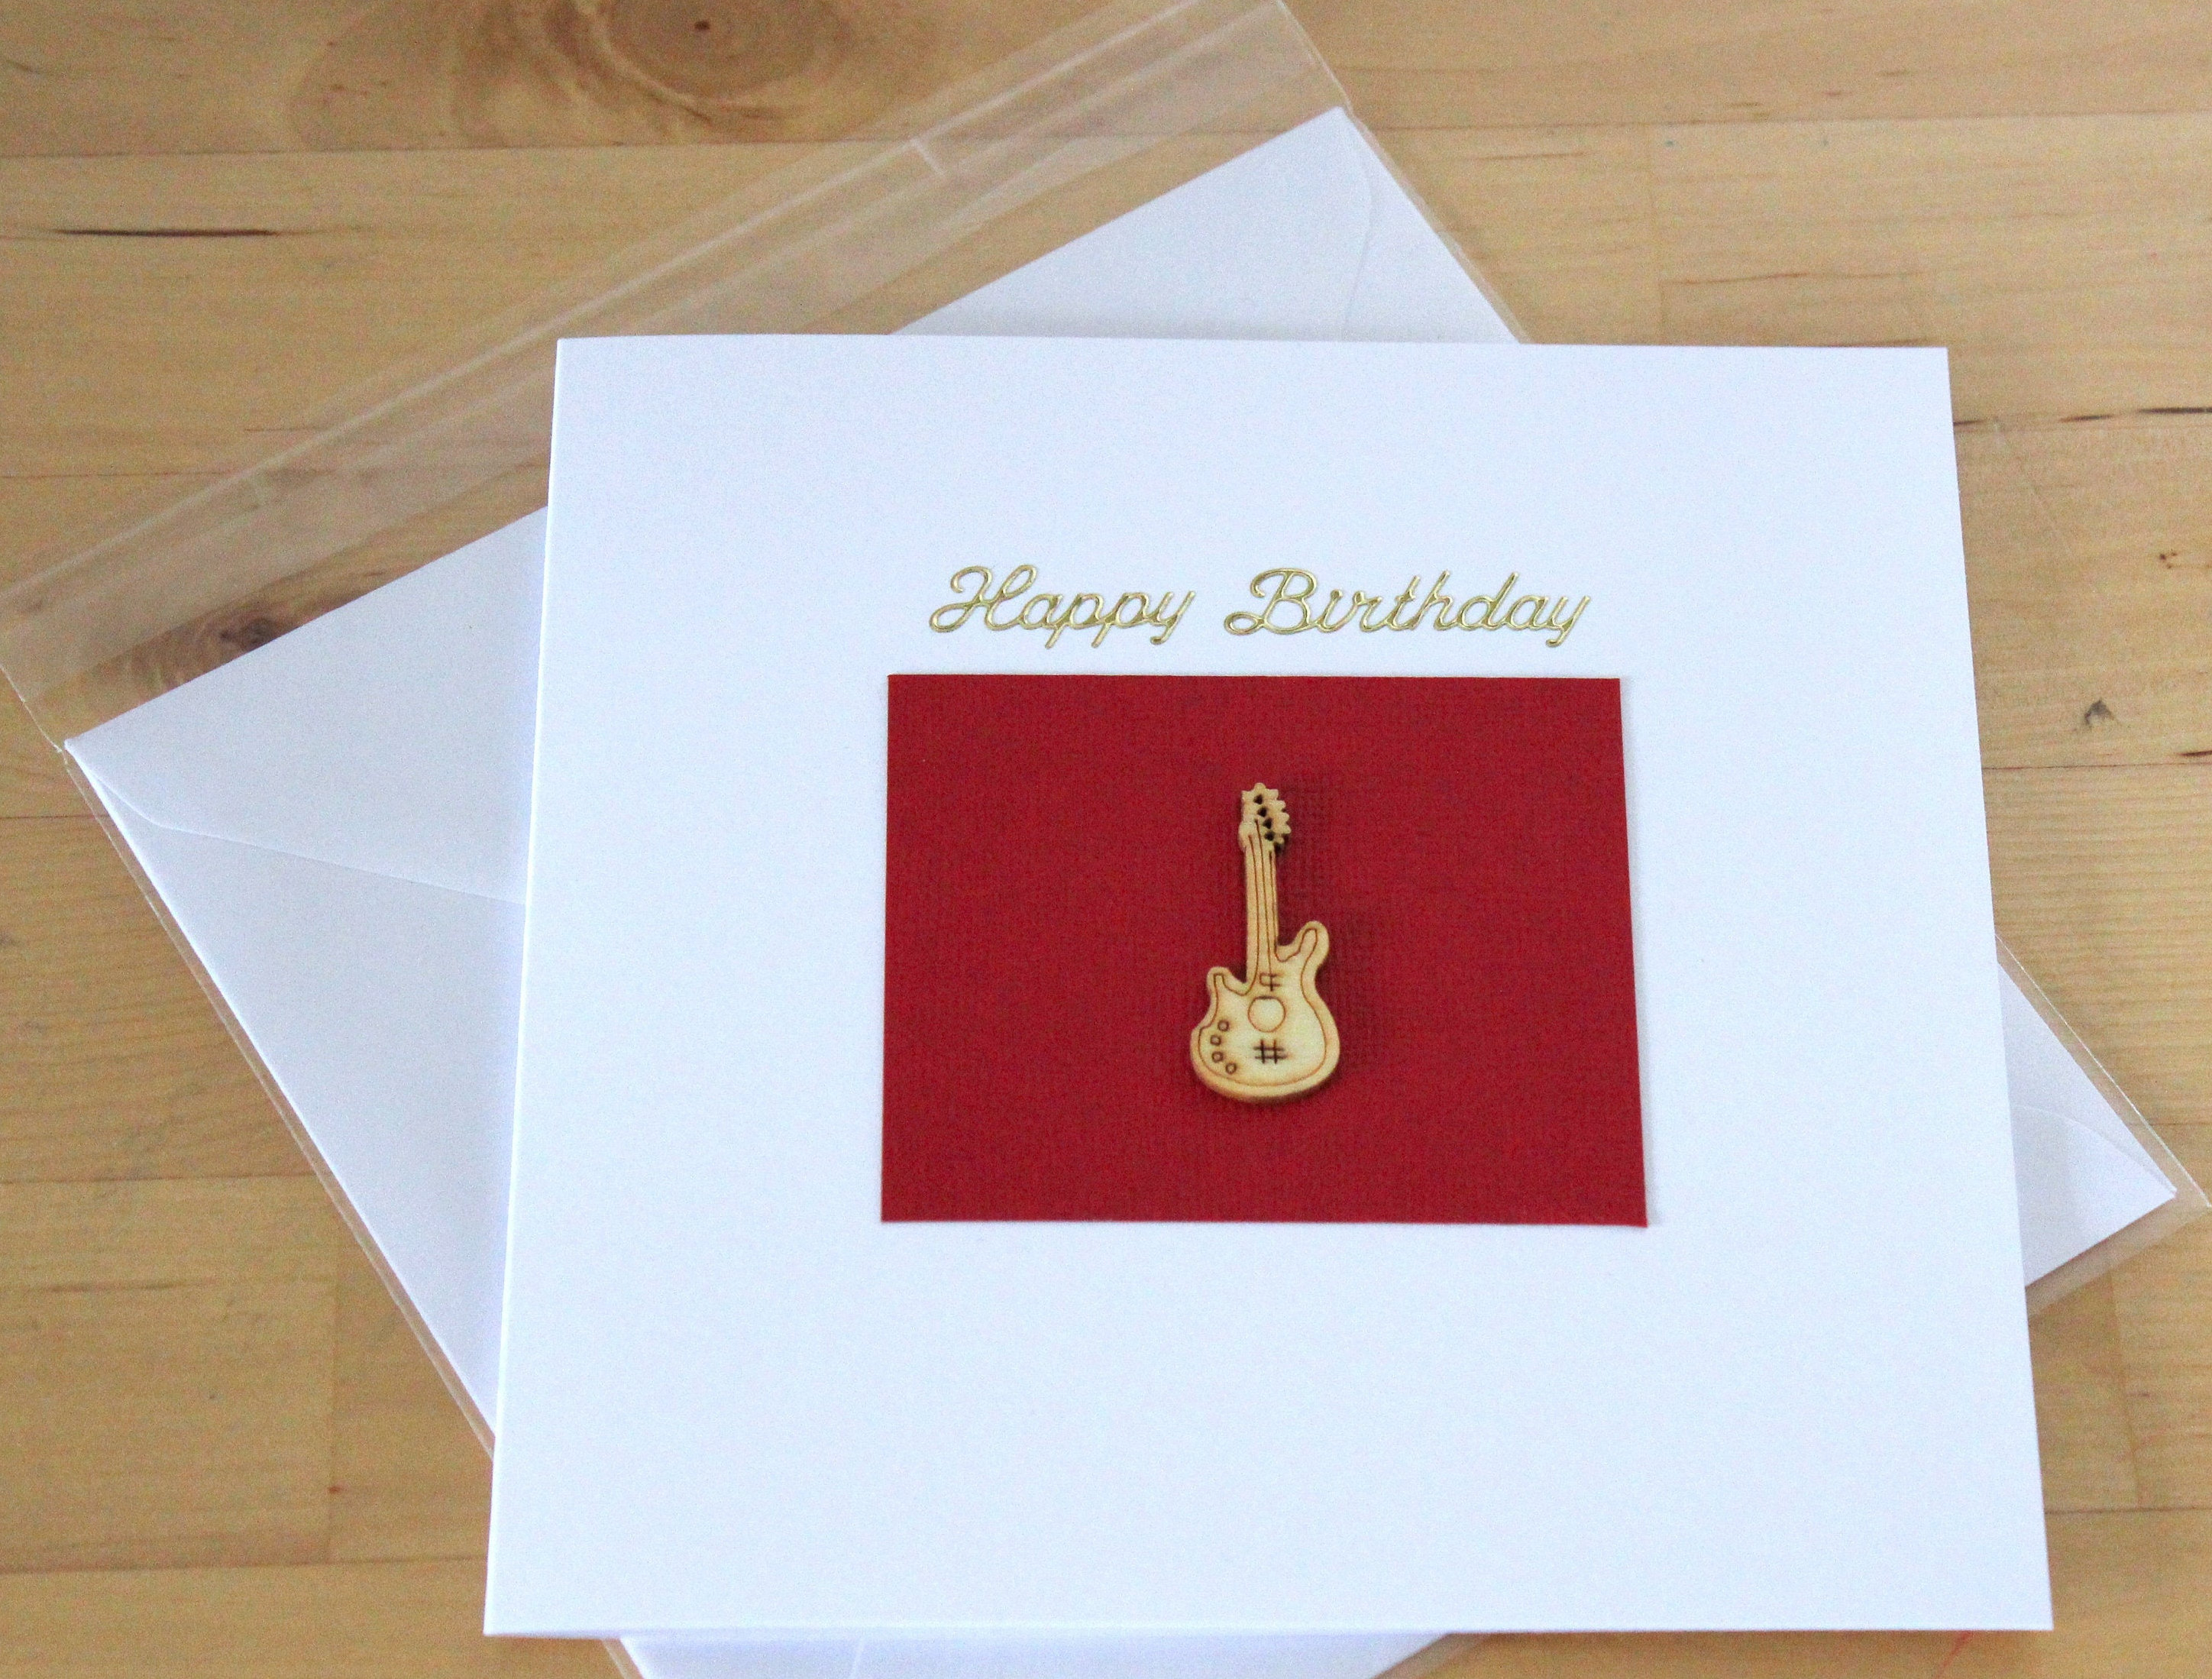 Birthday Card Ideas For Him Electric Guitar Birthday Card Gift Electric Guitar Cards Unique Birthday Card For Man Man Birthday Card Gift Birthday Card For Him